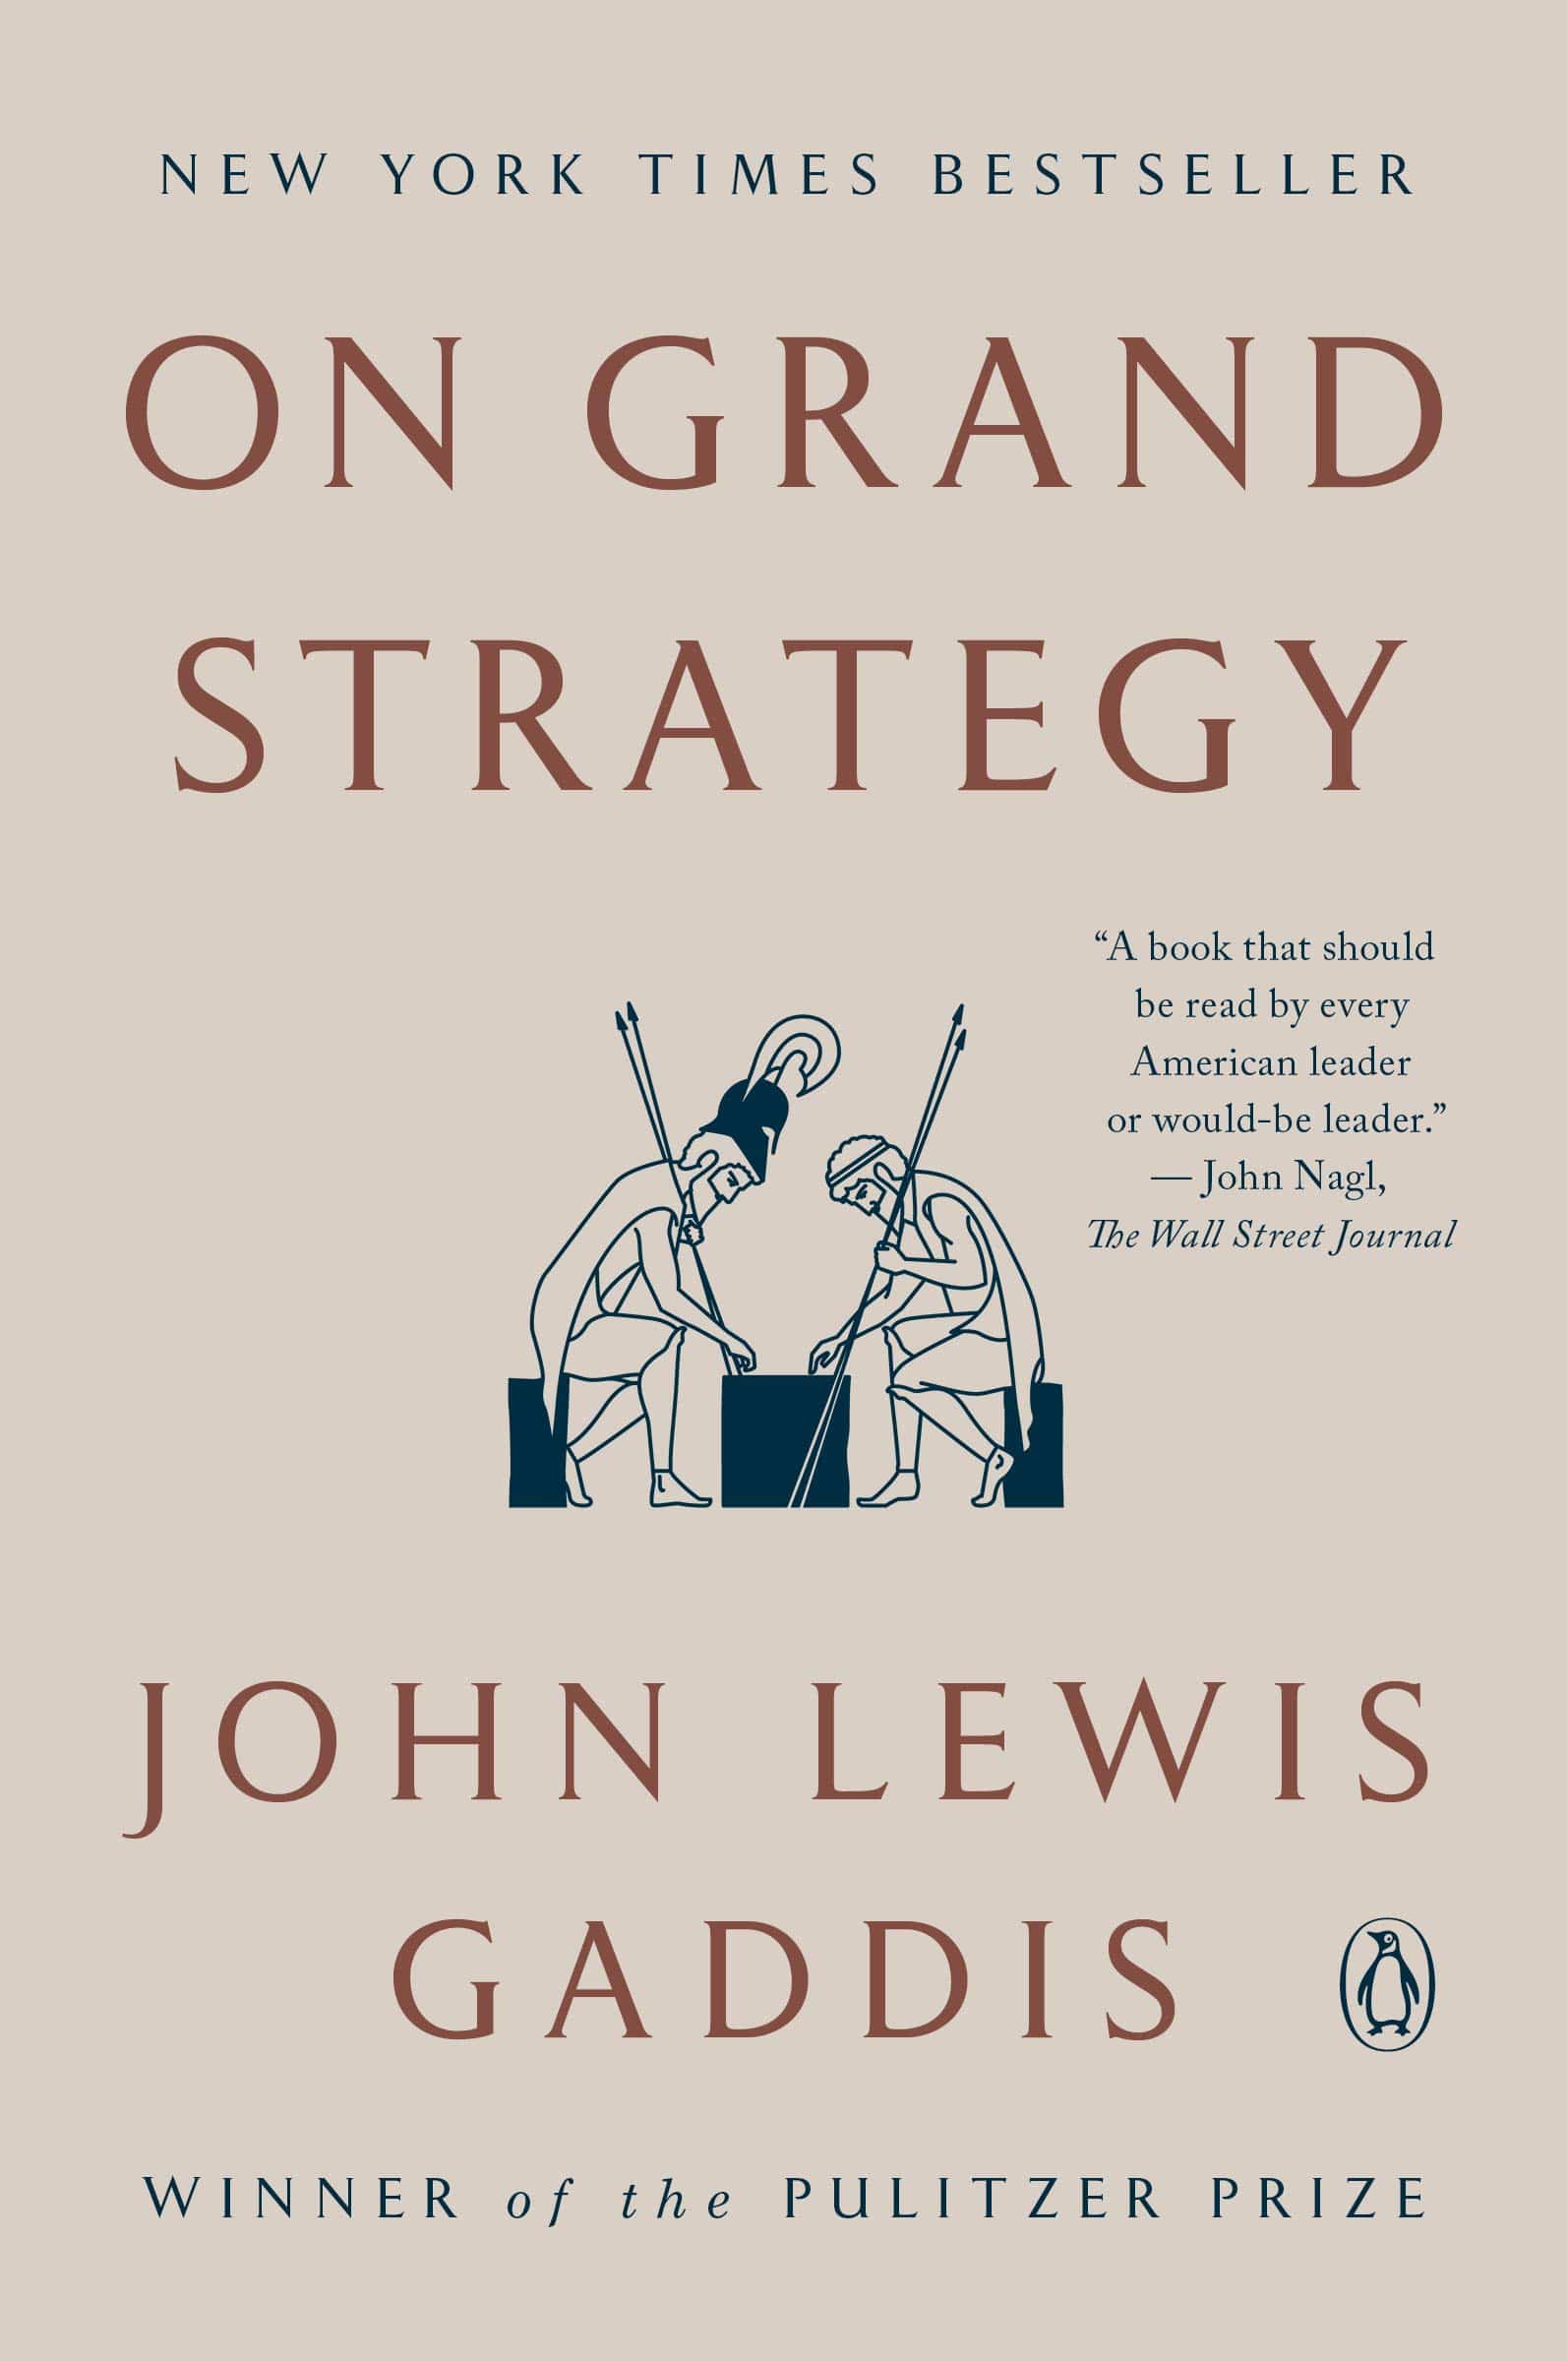 The cover of On Grand Strategy